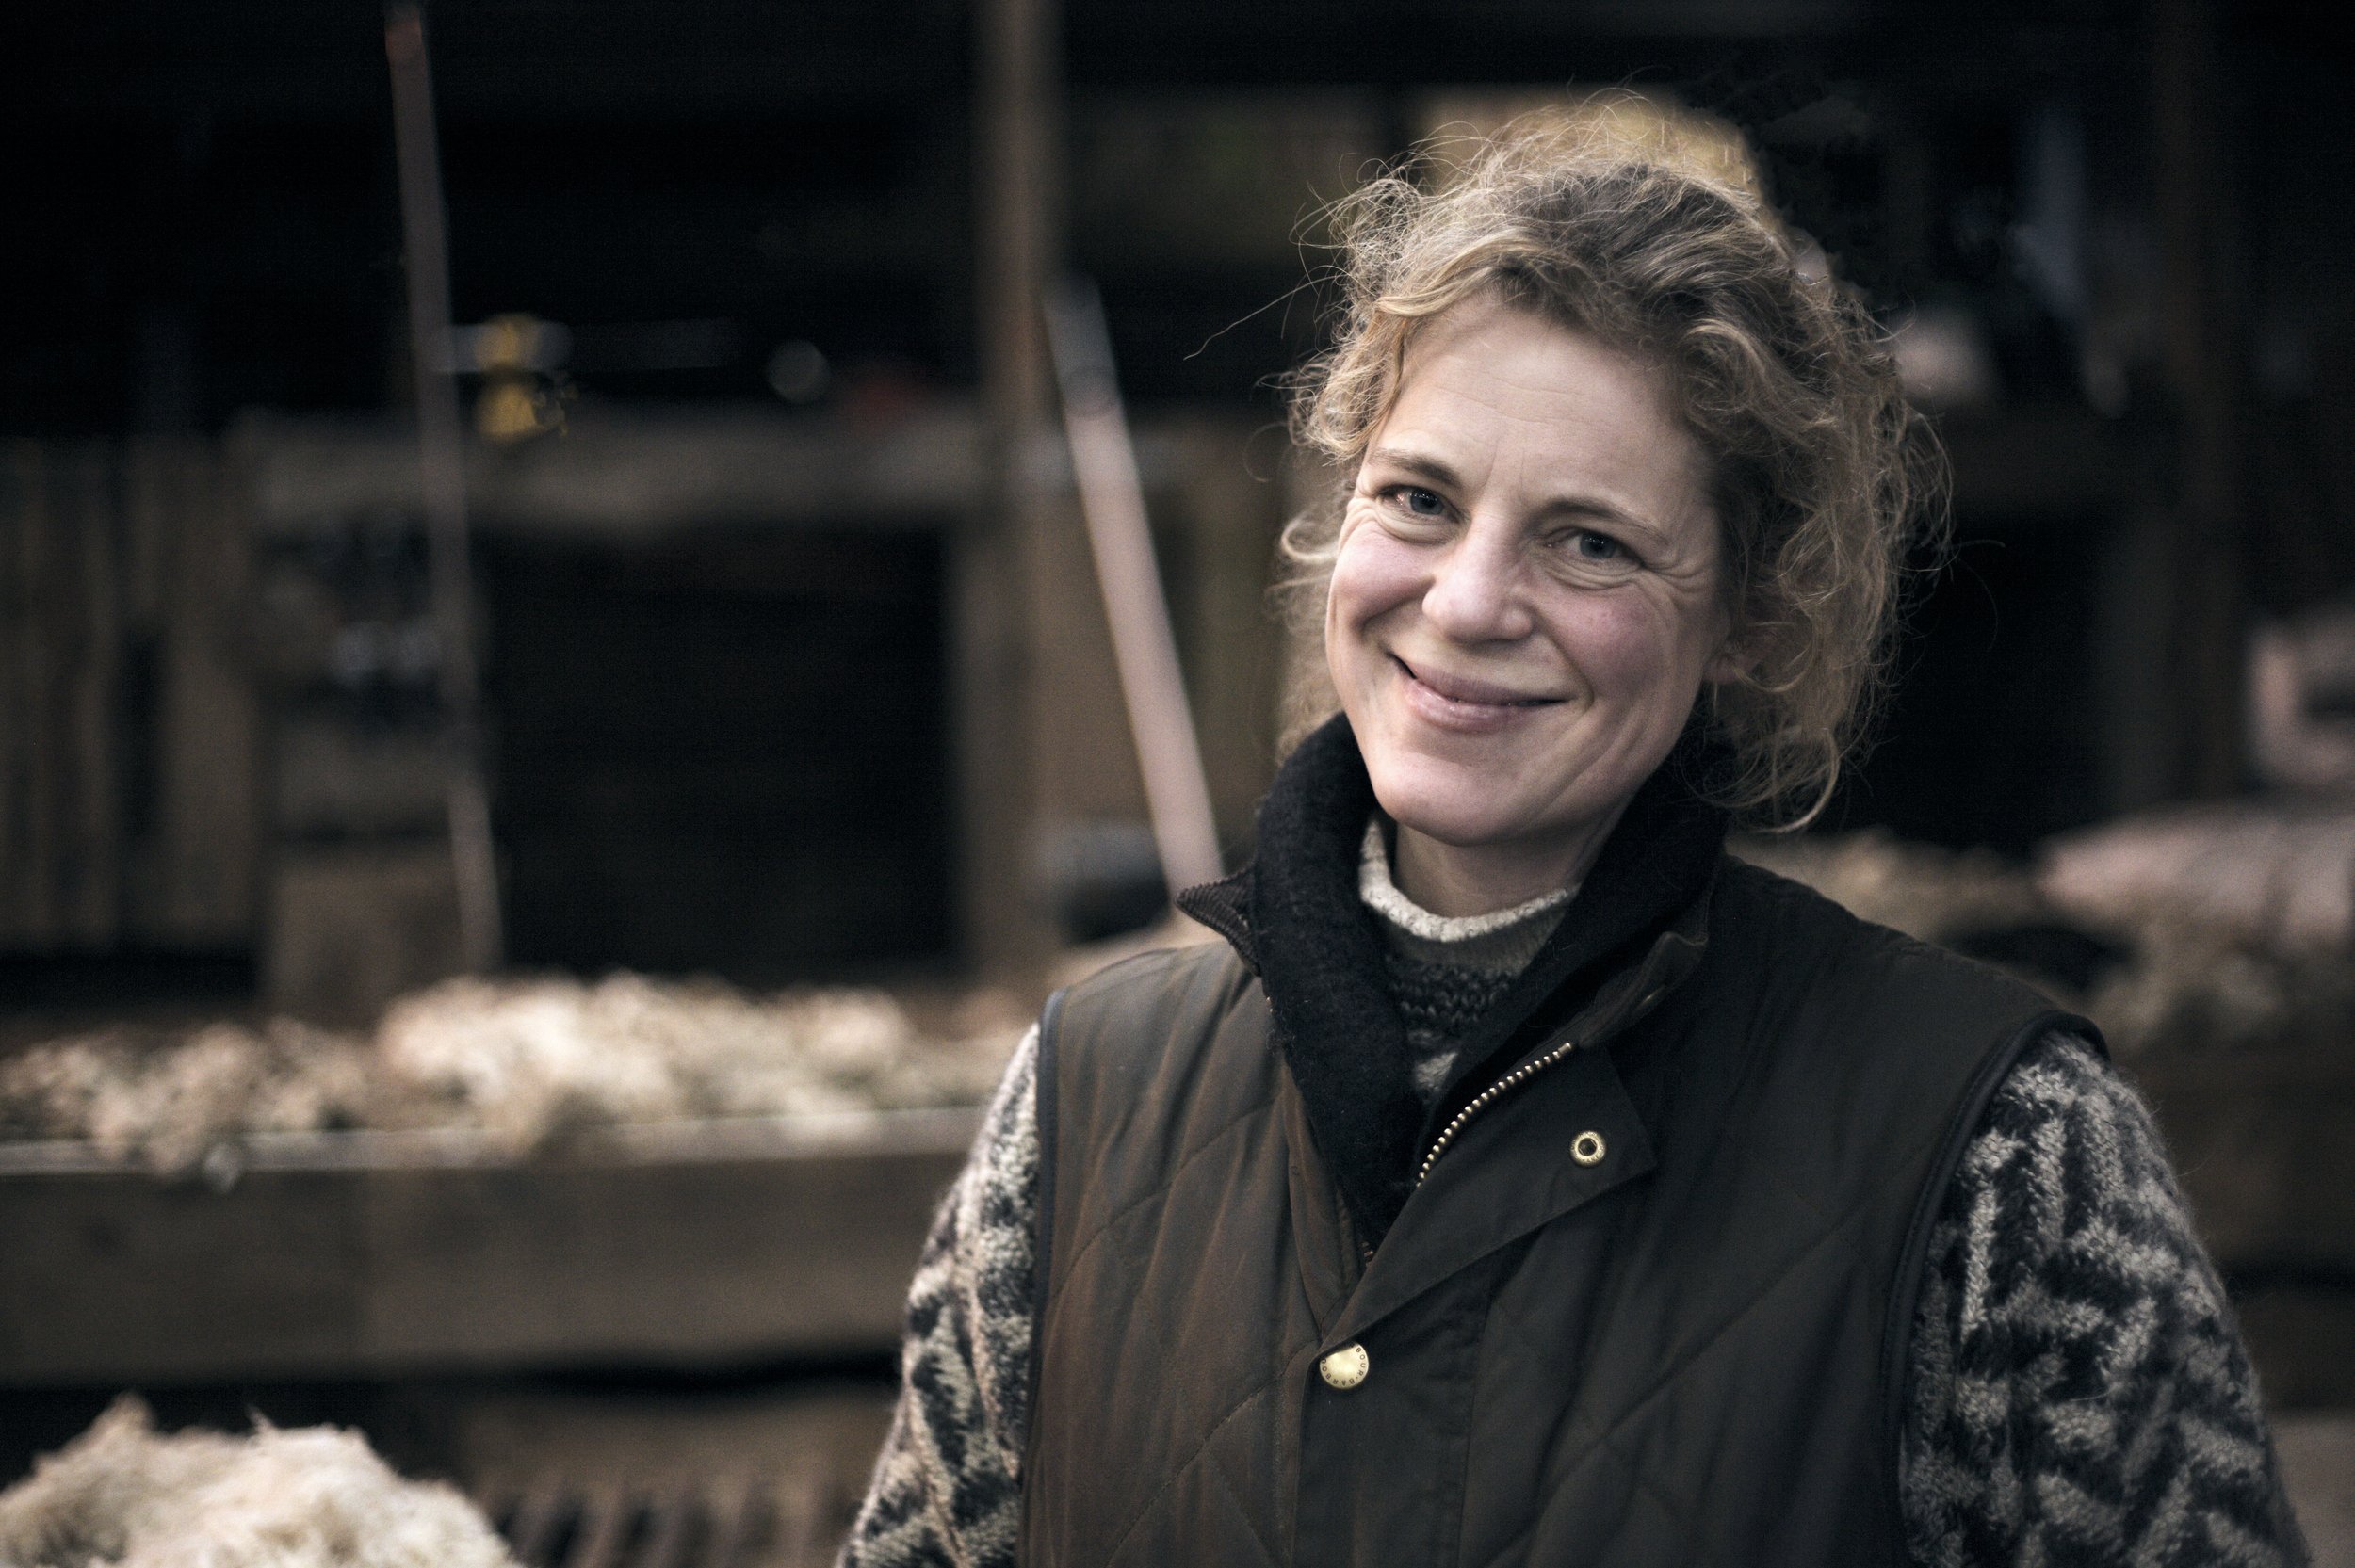  Jen Hunter is a former Nuffield Farming scholar who is a passionate advocate for wool and together with partner Andy Wear has built an inspirational business for meat and wool products which are now verified regenerative through A Greener World. 